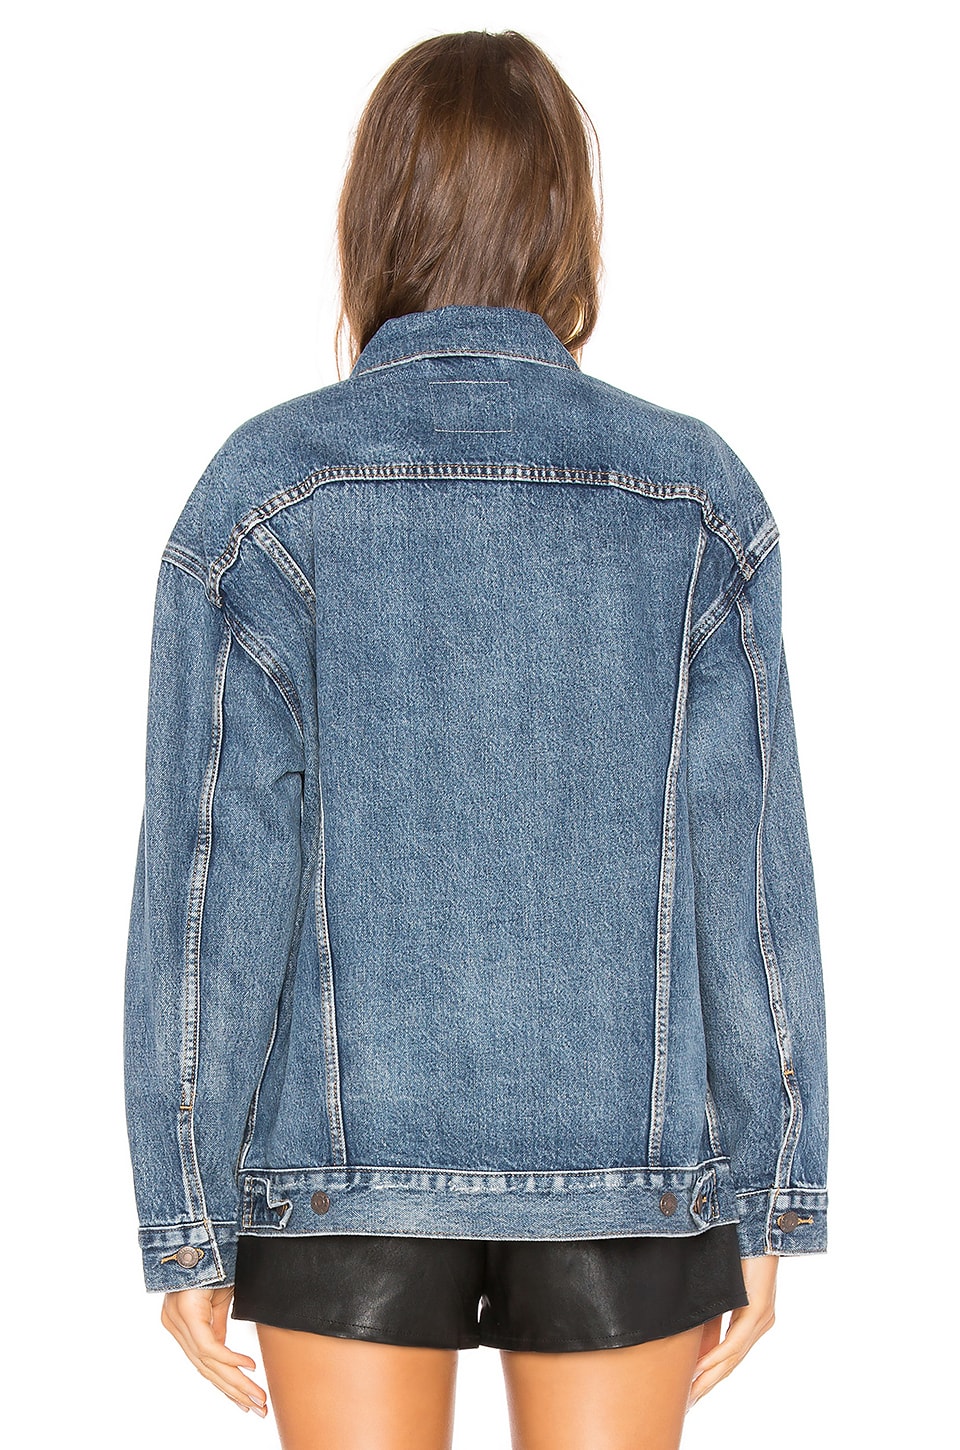 LEVI'S Baggy Trucker Jacket in Bust A Move | REVOLVE